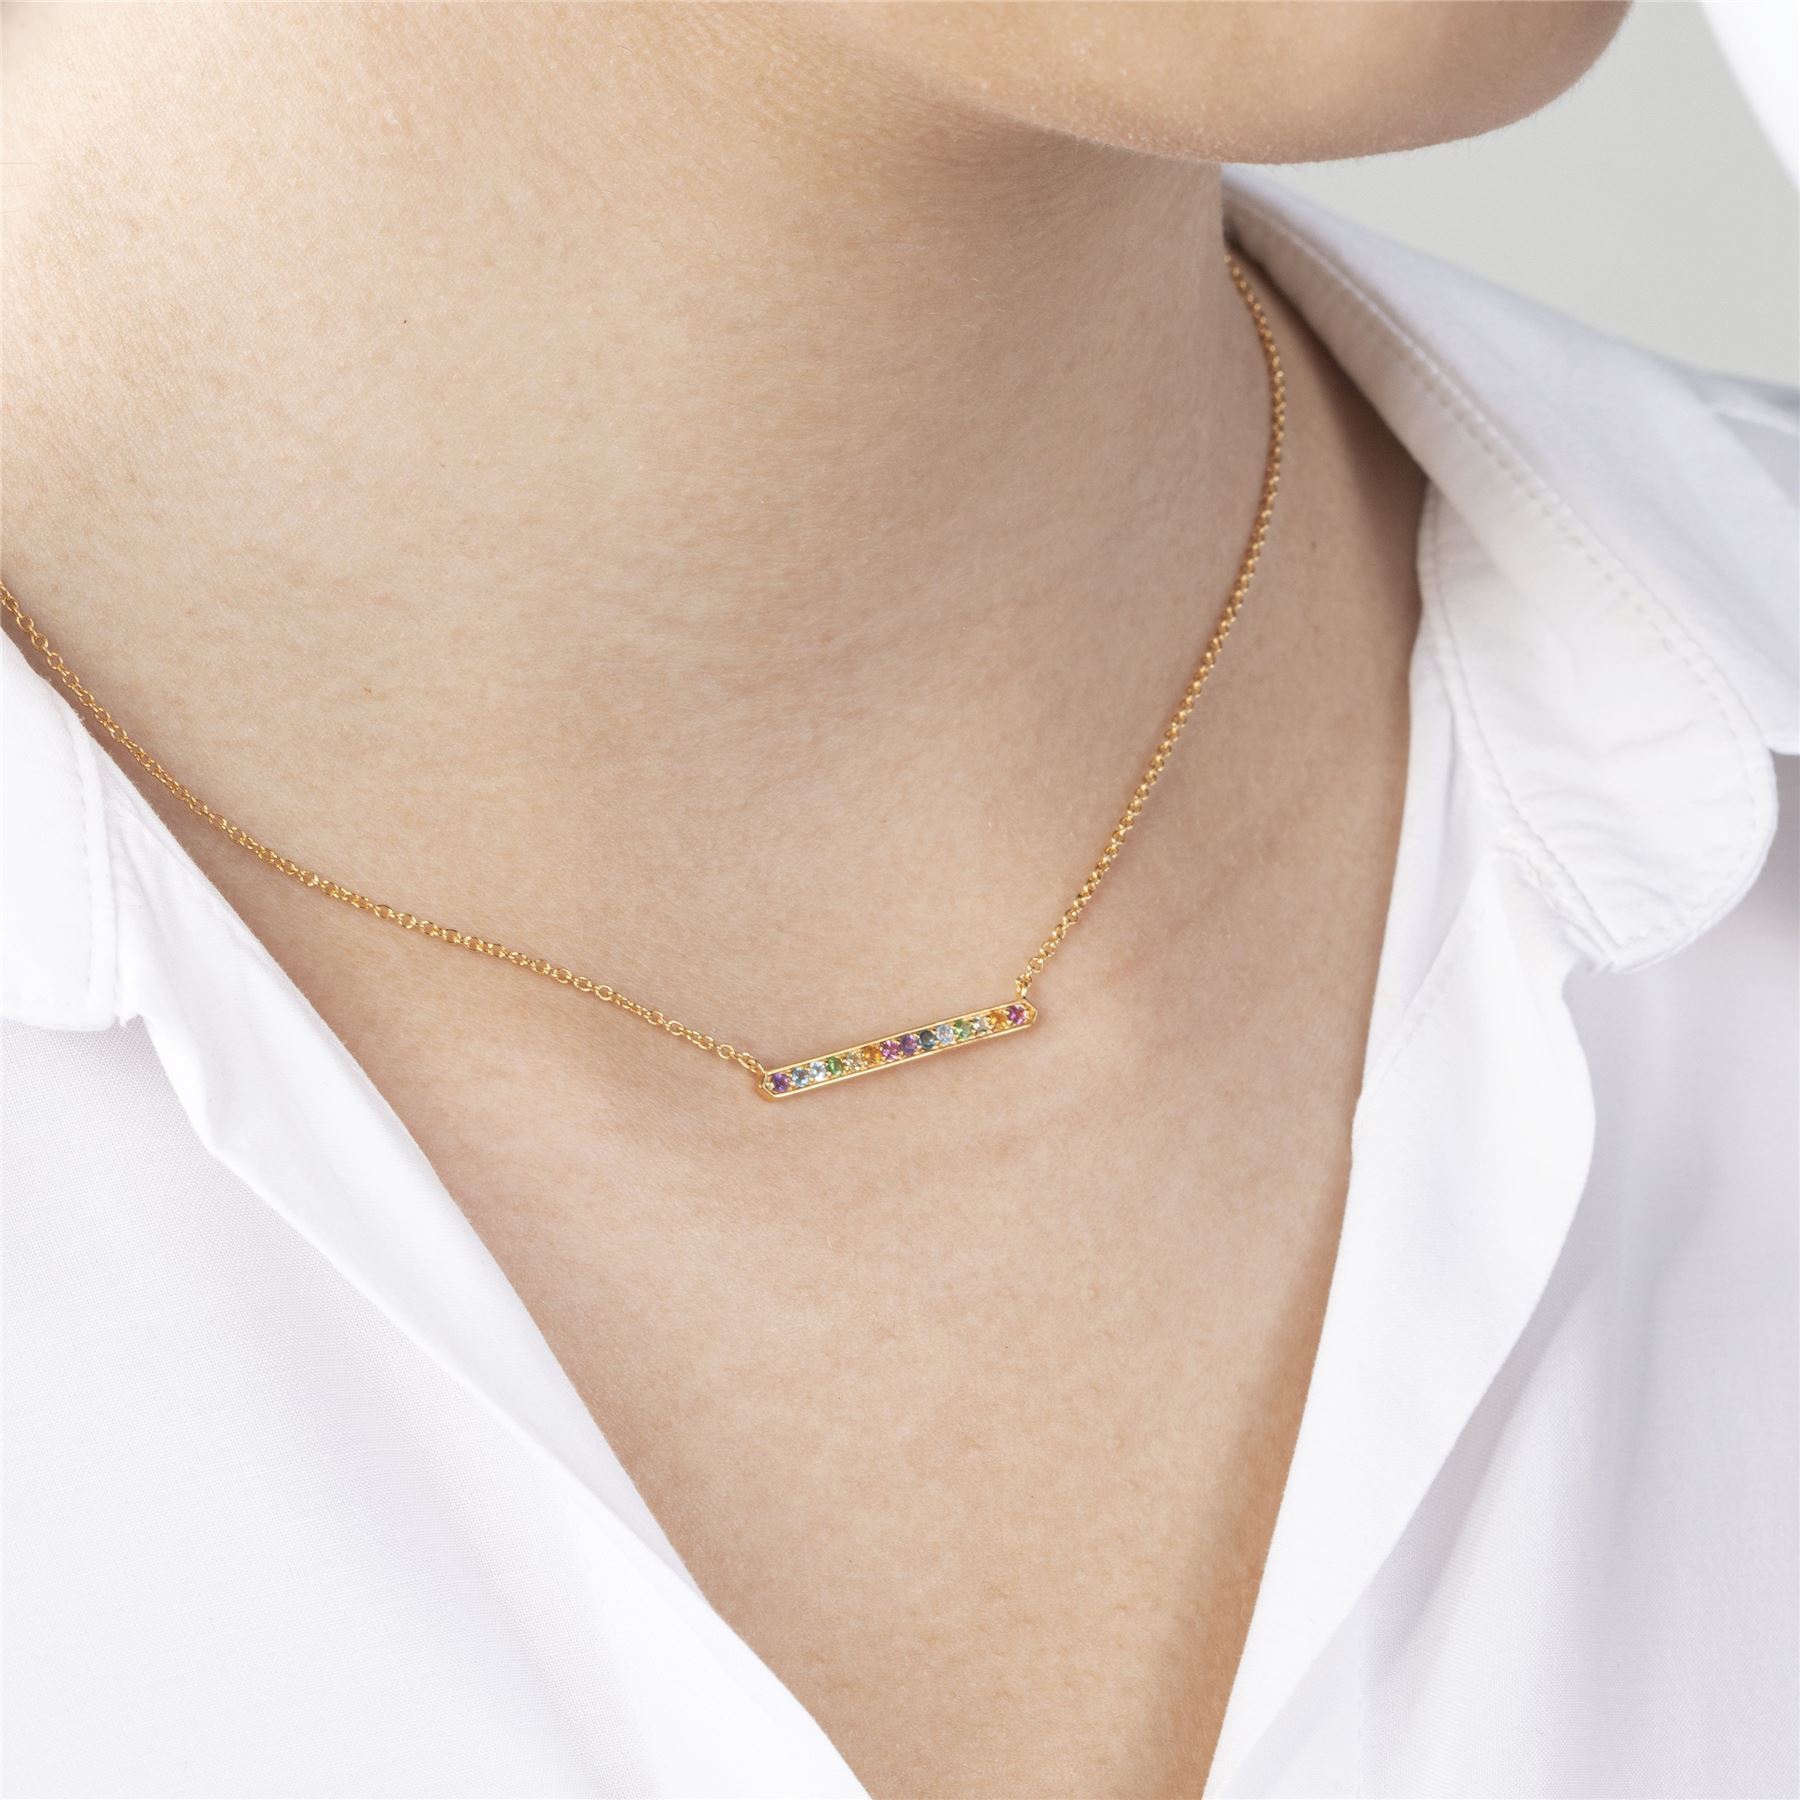 Rainbow Gemstone Bar Necklace in Gold Plated Sterling Silver on model